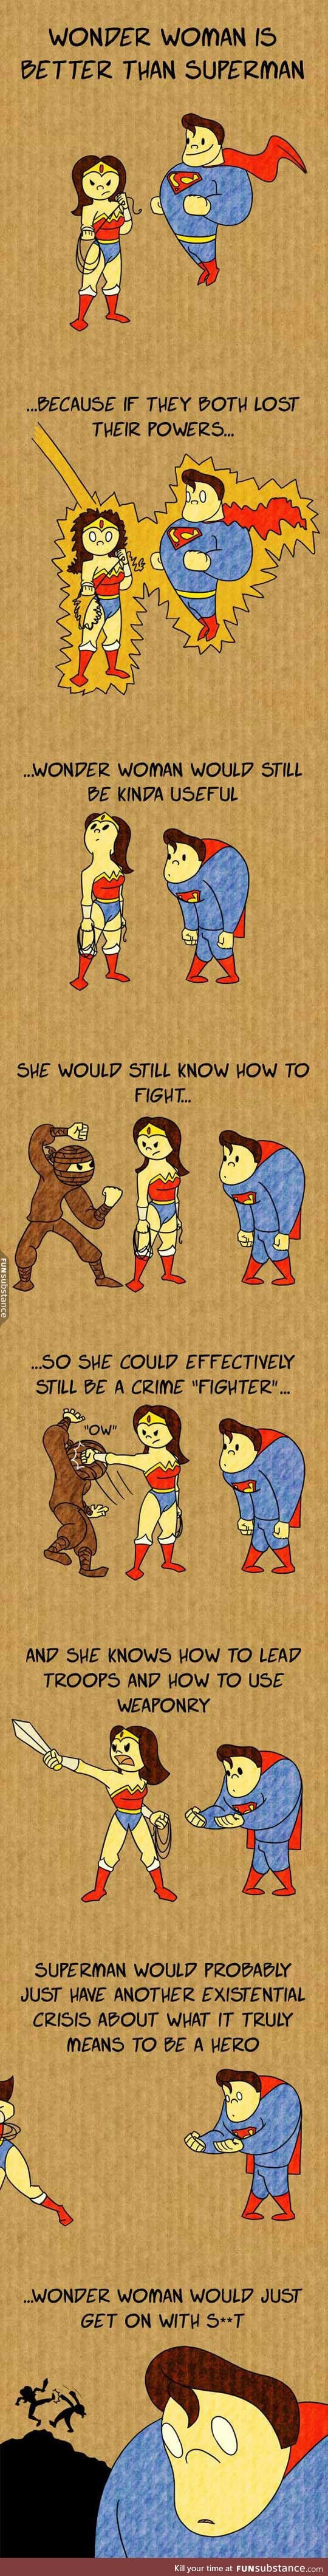 Wonder woman and super man compared